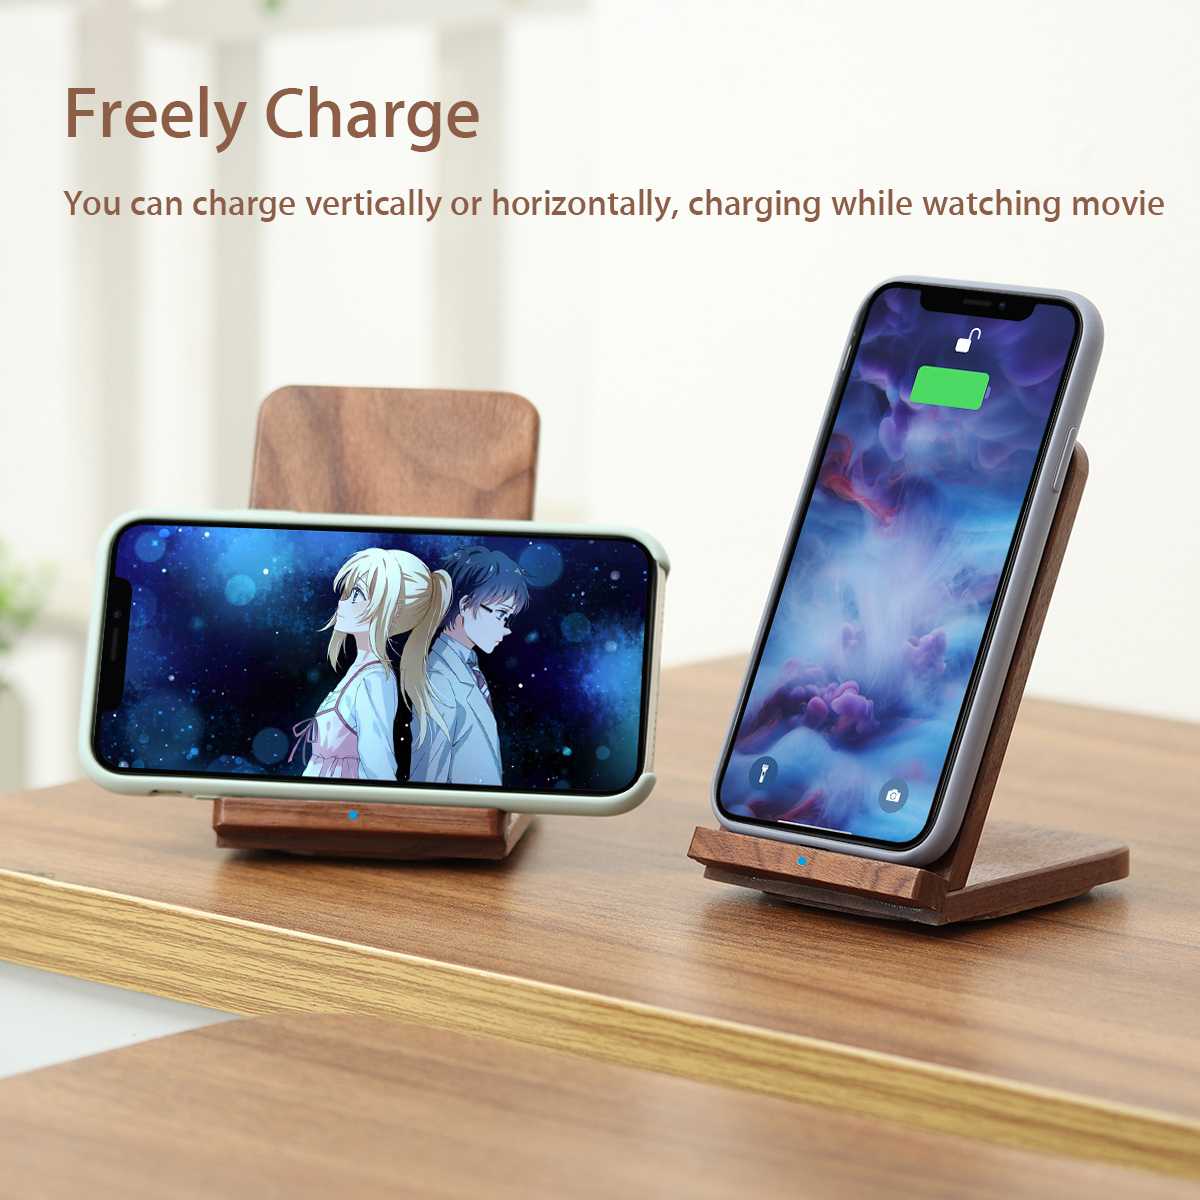 Walnut Wooden 15W Qi Wireless Charger Pad Fast Charging Docking Station Holder Stand Type-c Port for iPhone for Samsung S20